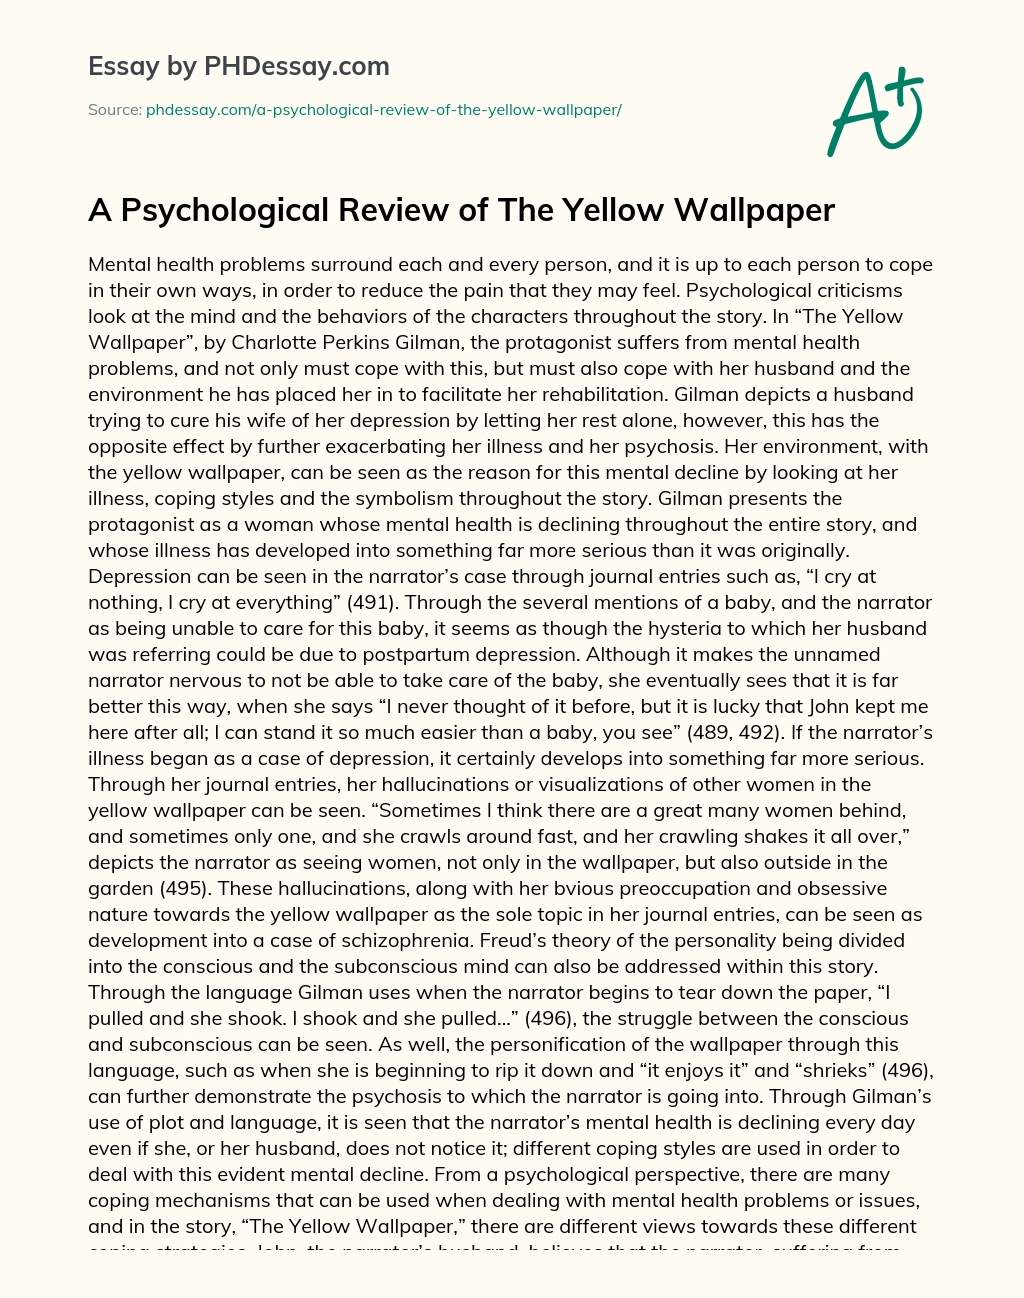 A Psychological Review of The Yellow Wallpaper essay